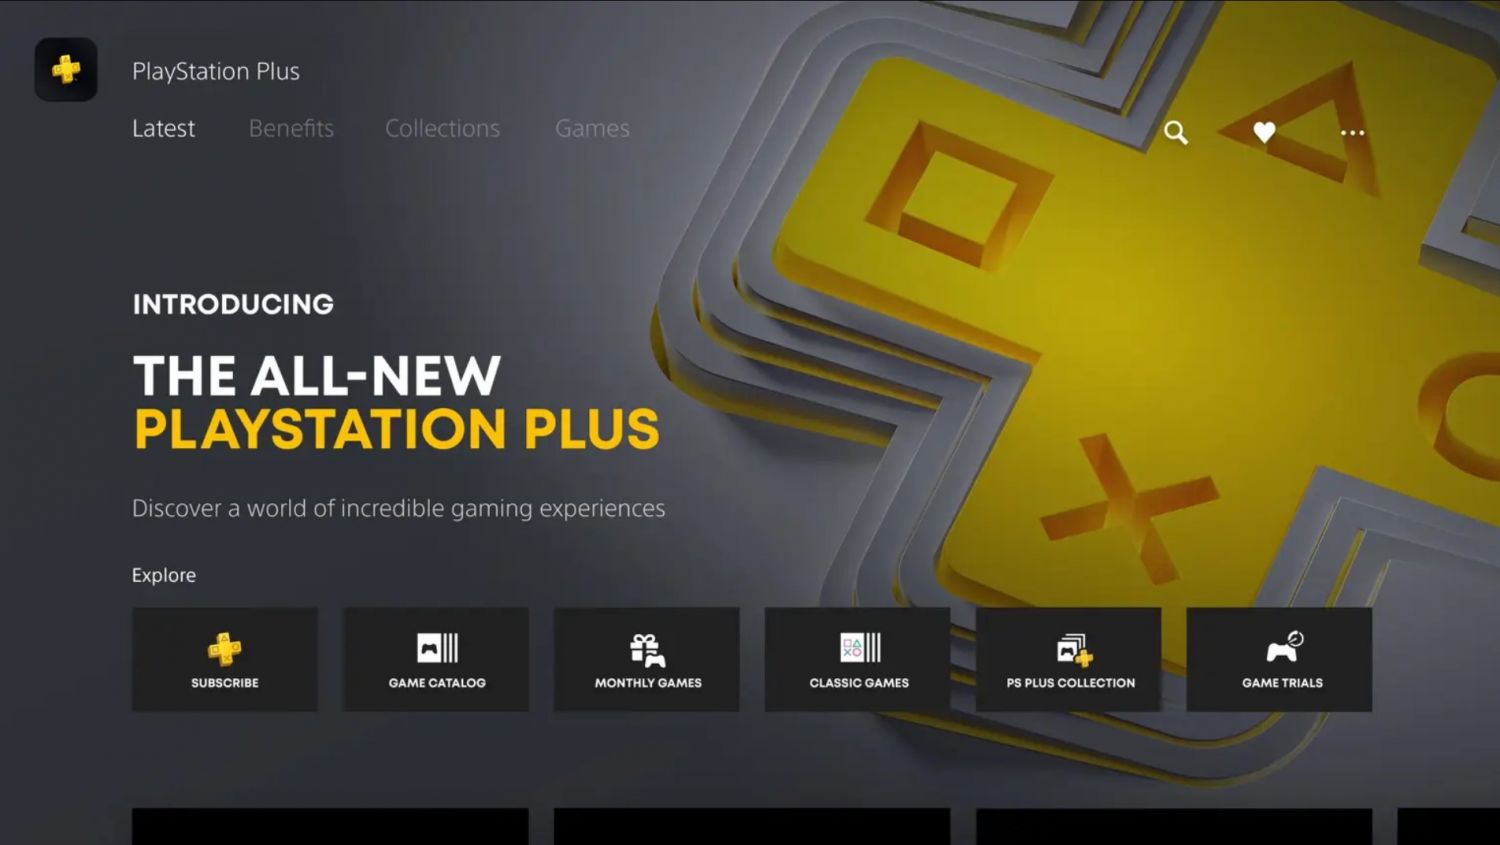 The all-new PlayStation Plus